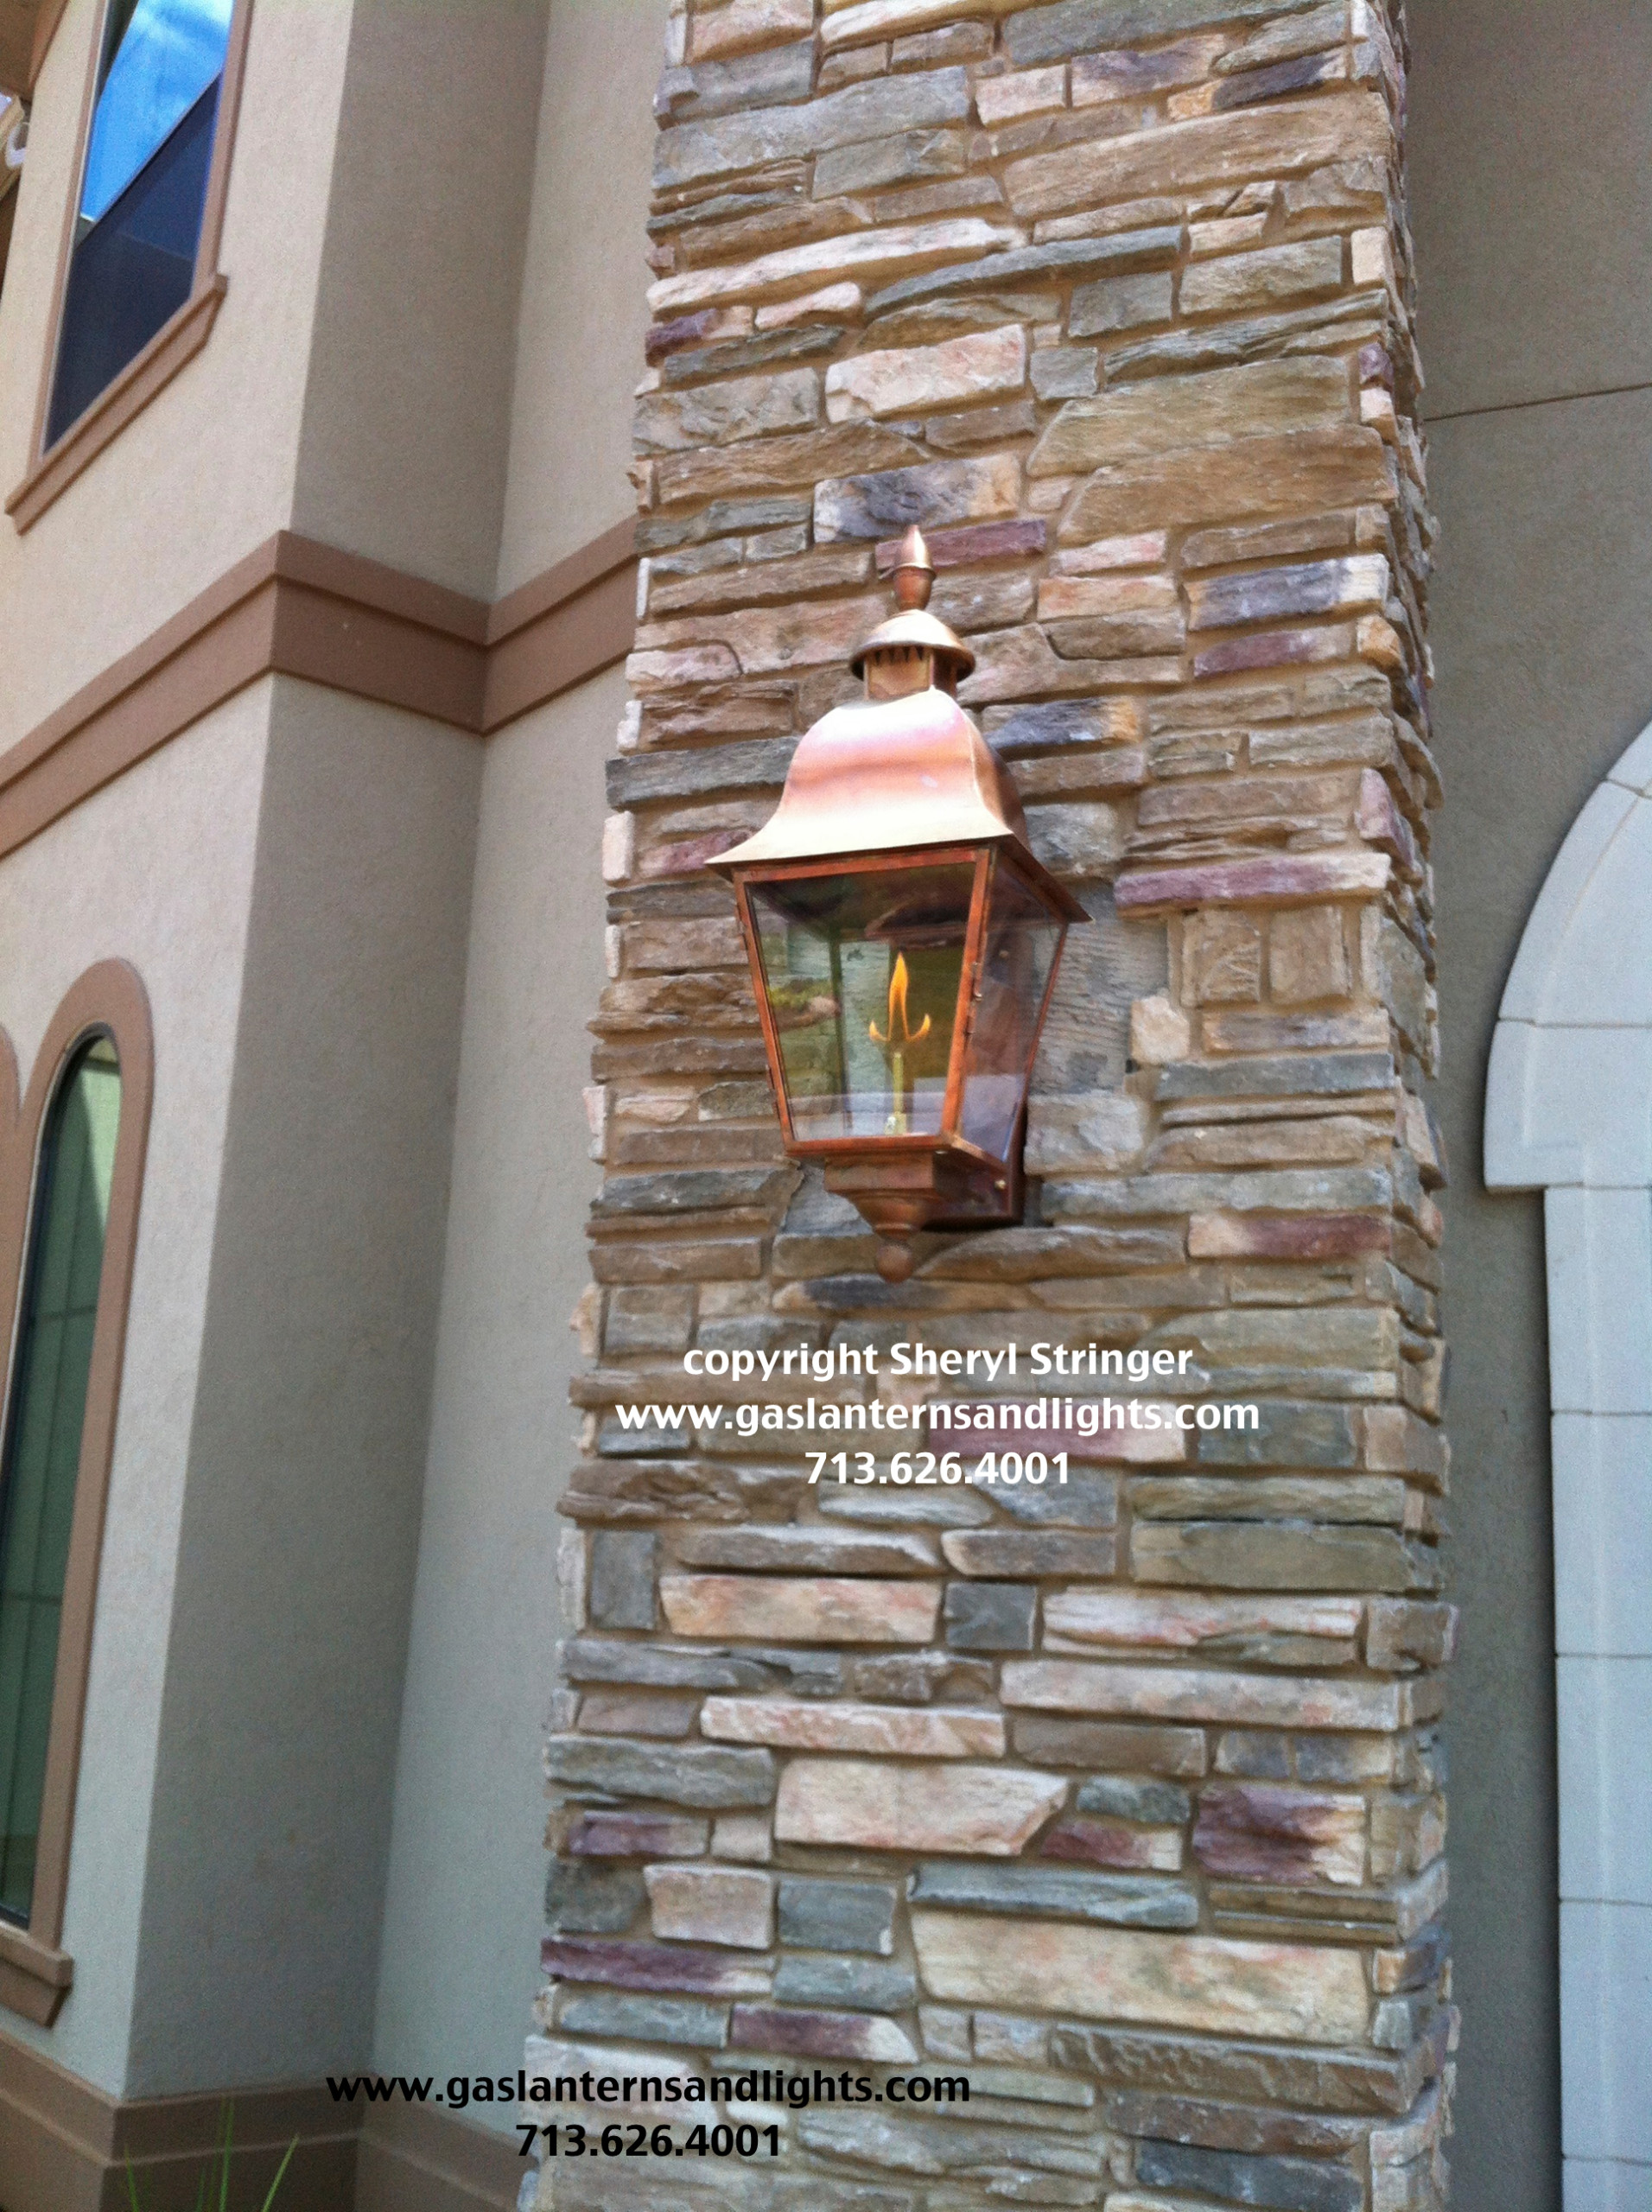 Sheryl's Tuscan Gas Lanterns with Natural Copper Finish